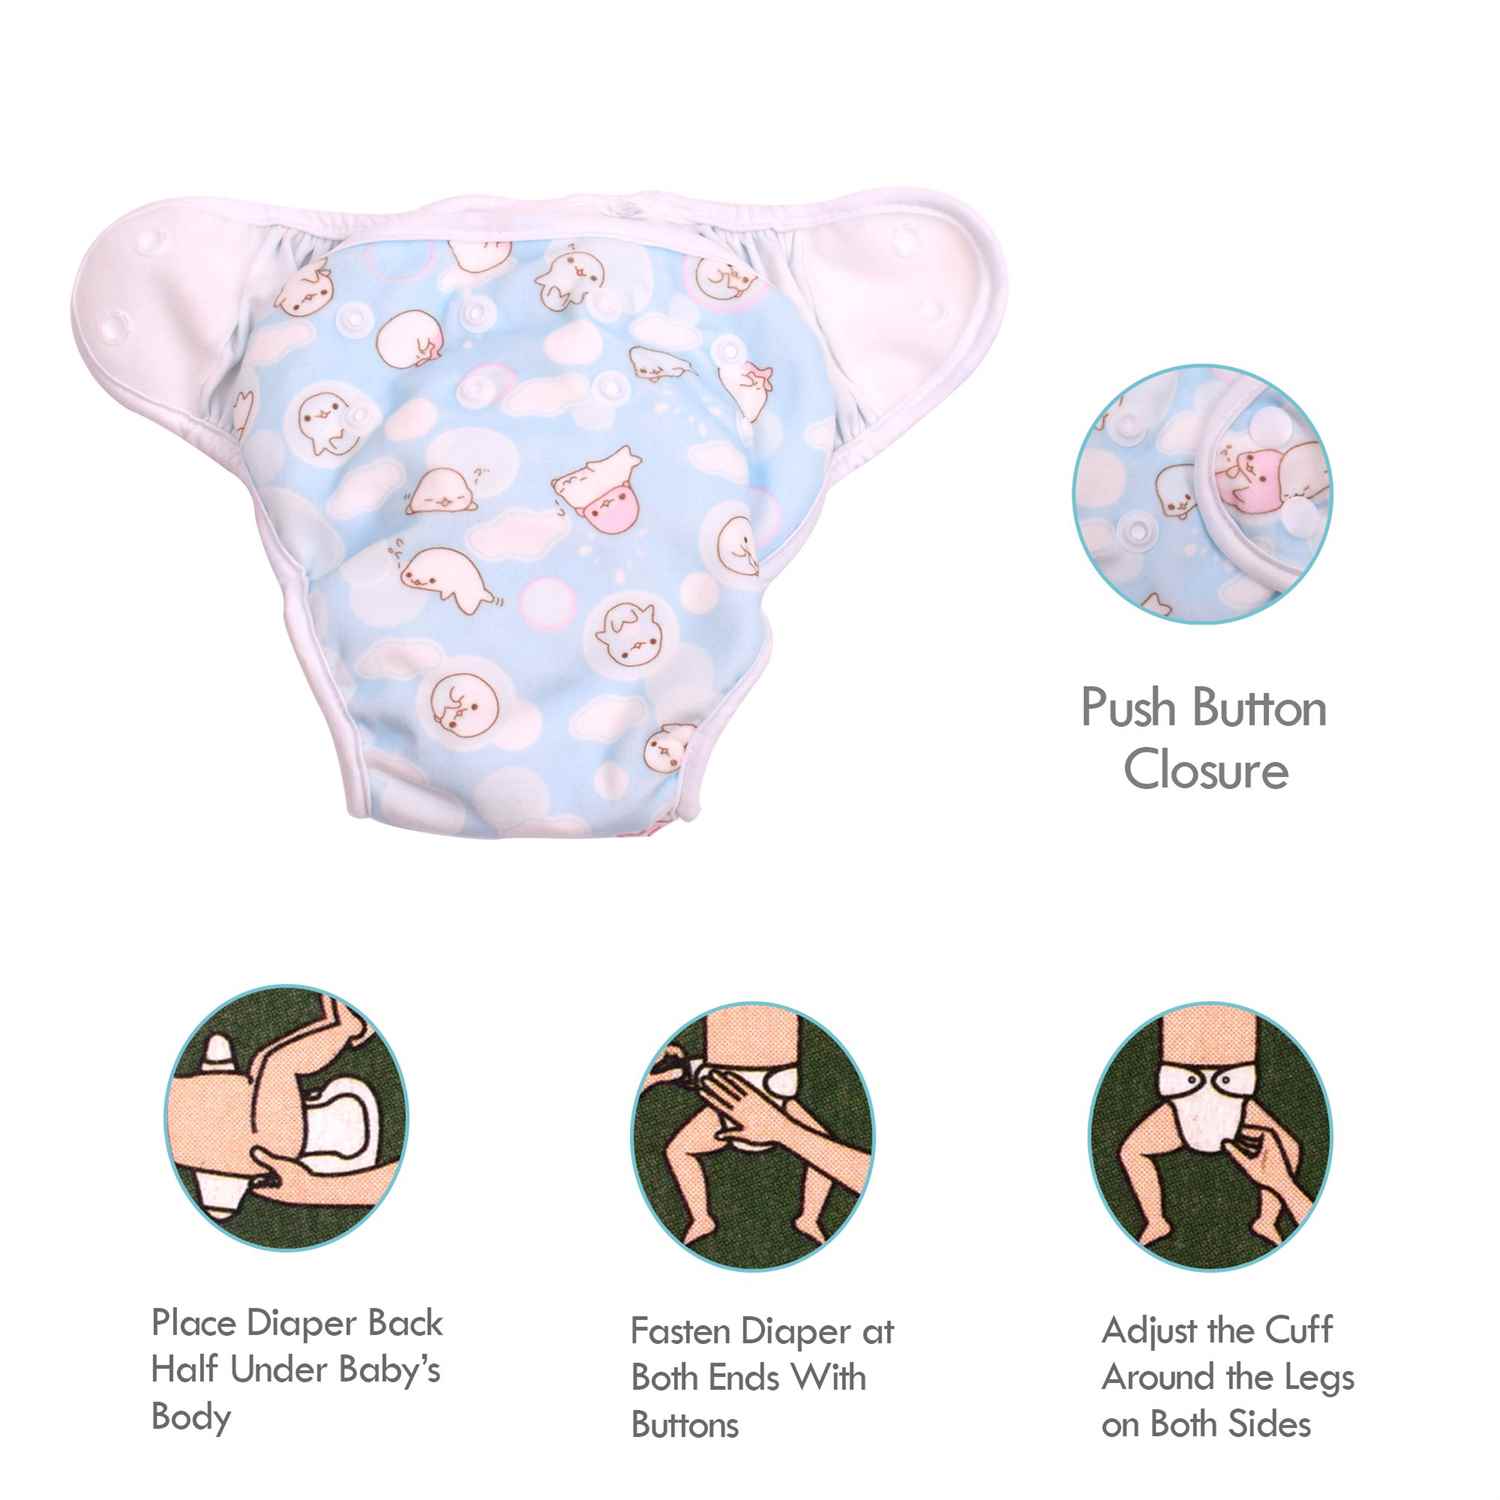 PAW PAW Baby Reusable Fabric Diaper with Pad, Size XL (10-14kg)-Blue